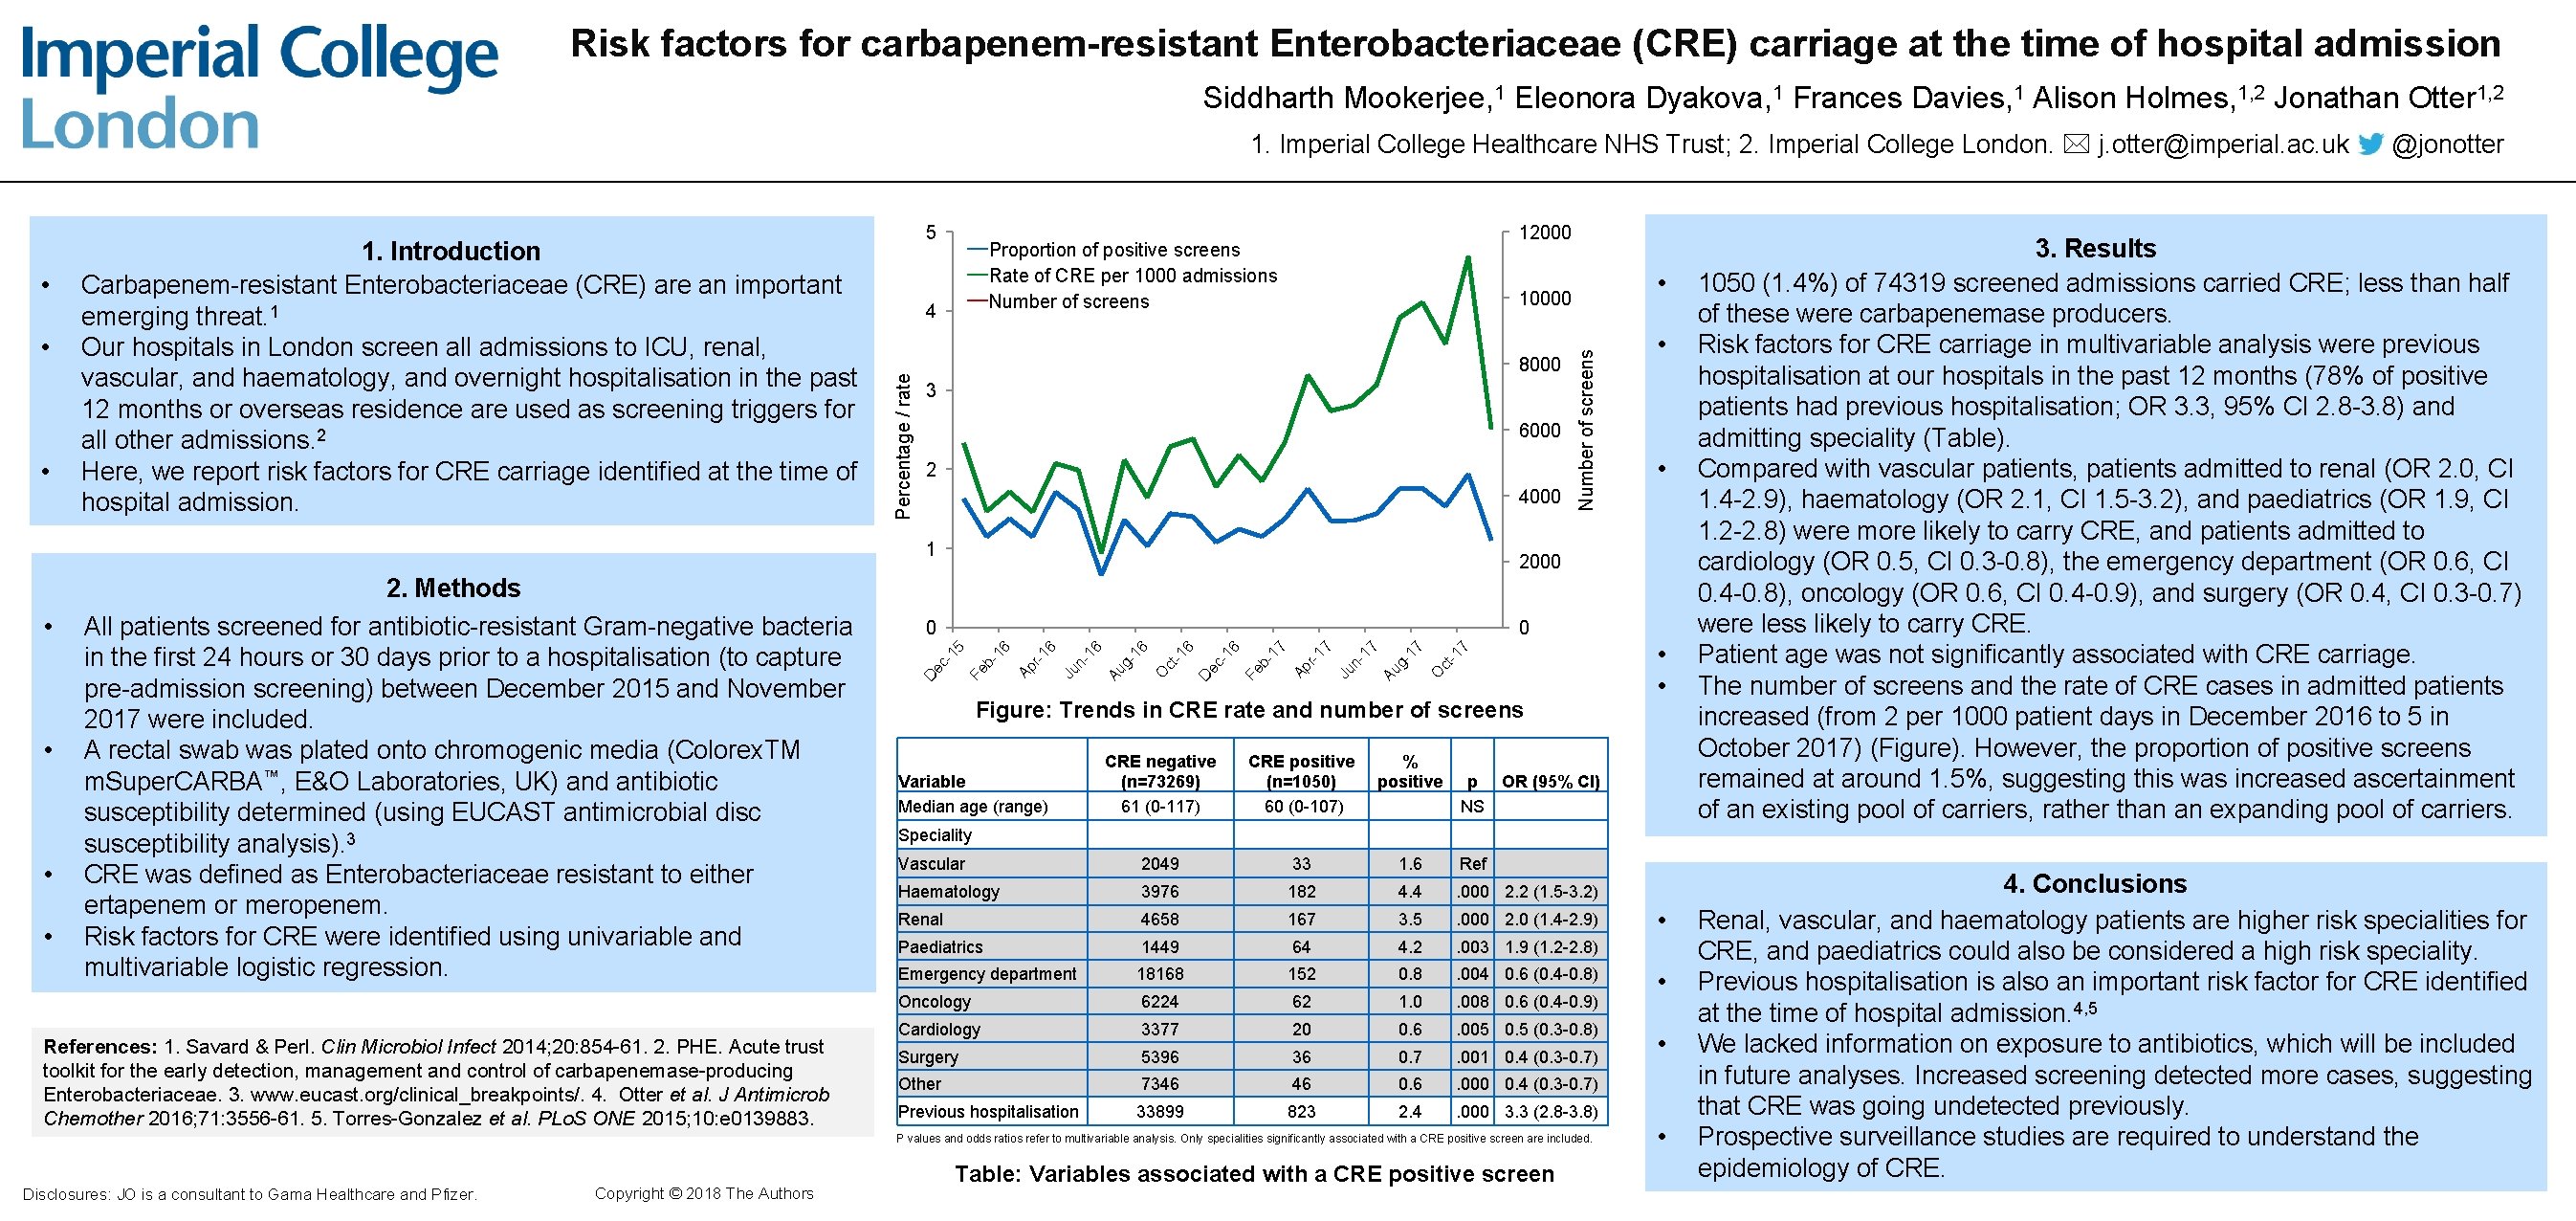 Risk factors for carbapenem-resistant Enterobacteriaceae (CRE) carriage at the time of hospital admission Siddharth